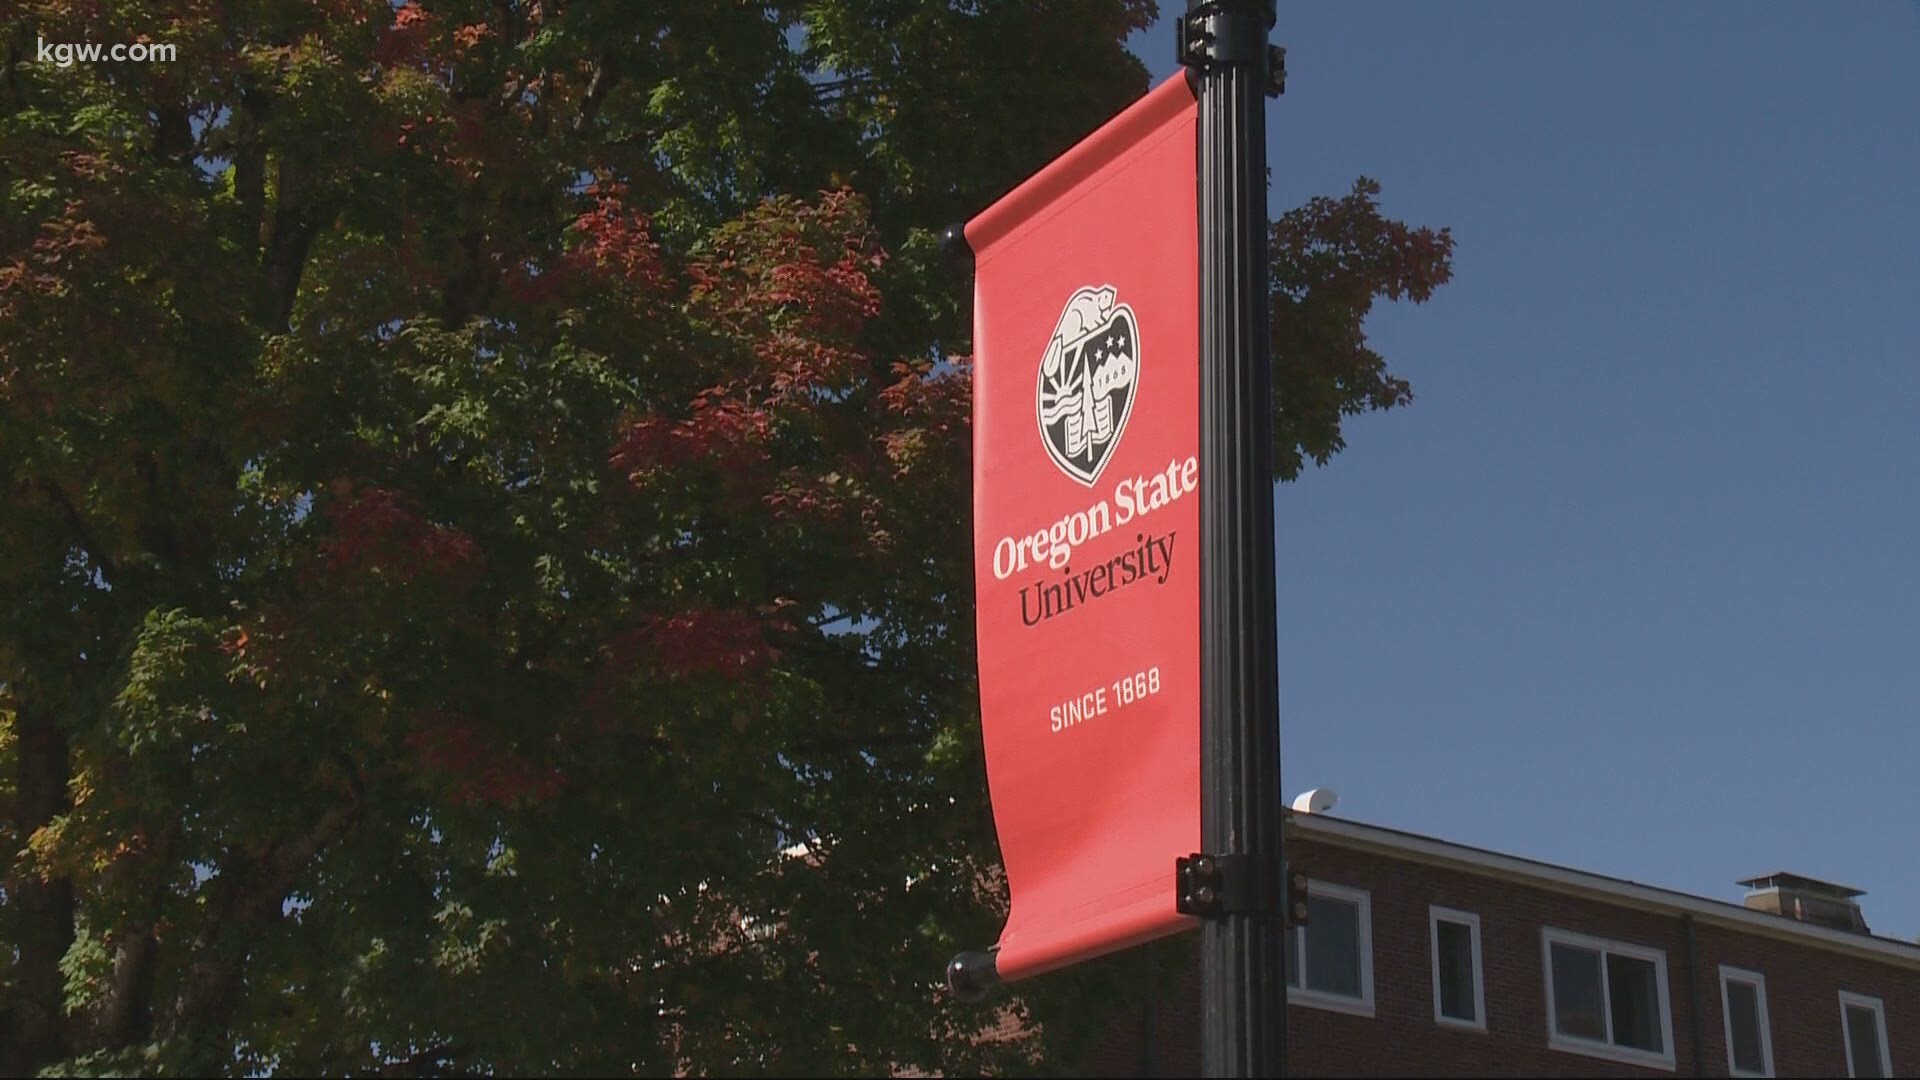 Oregon State University is extending remote learning for students. Joe Raineri reports.